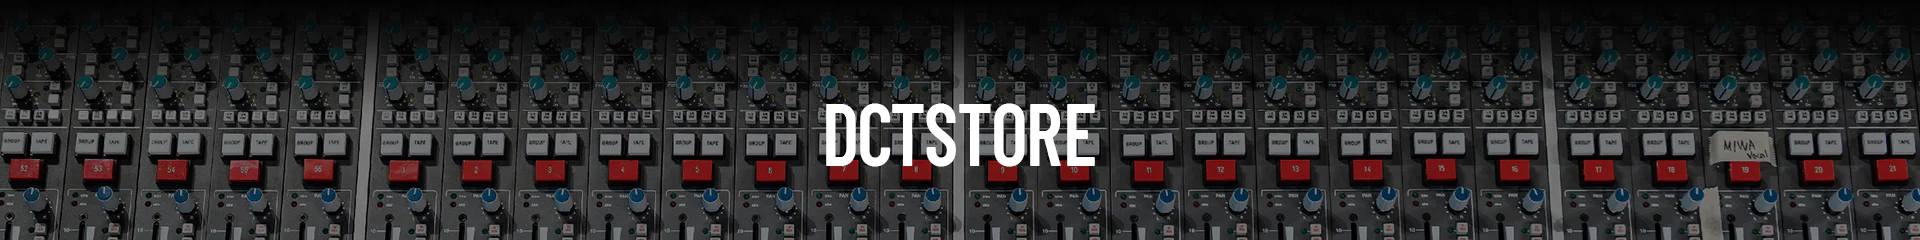 DCT STORE